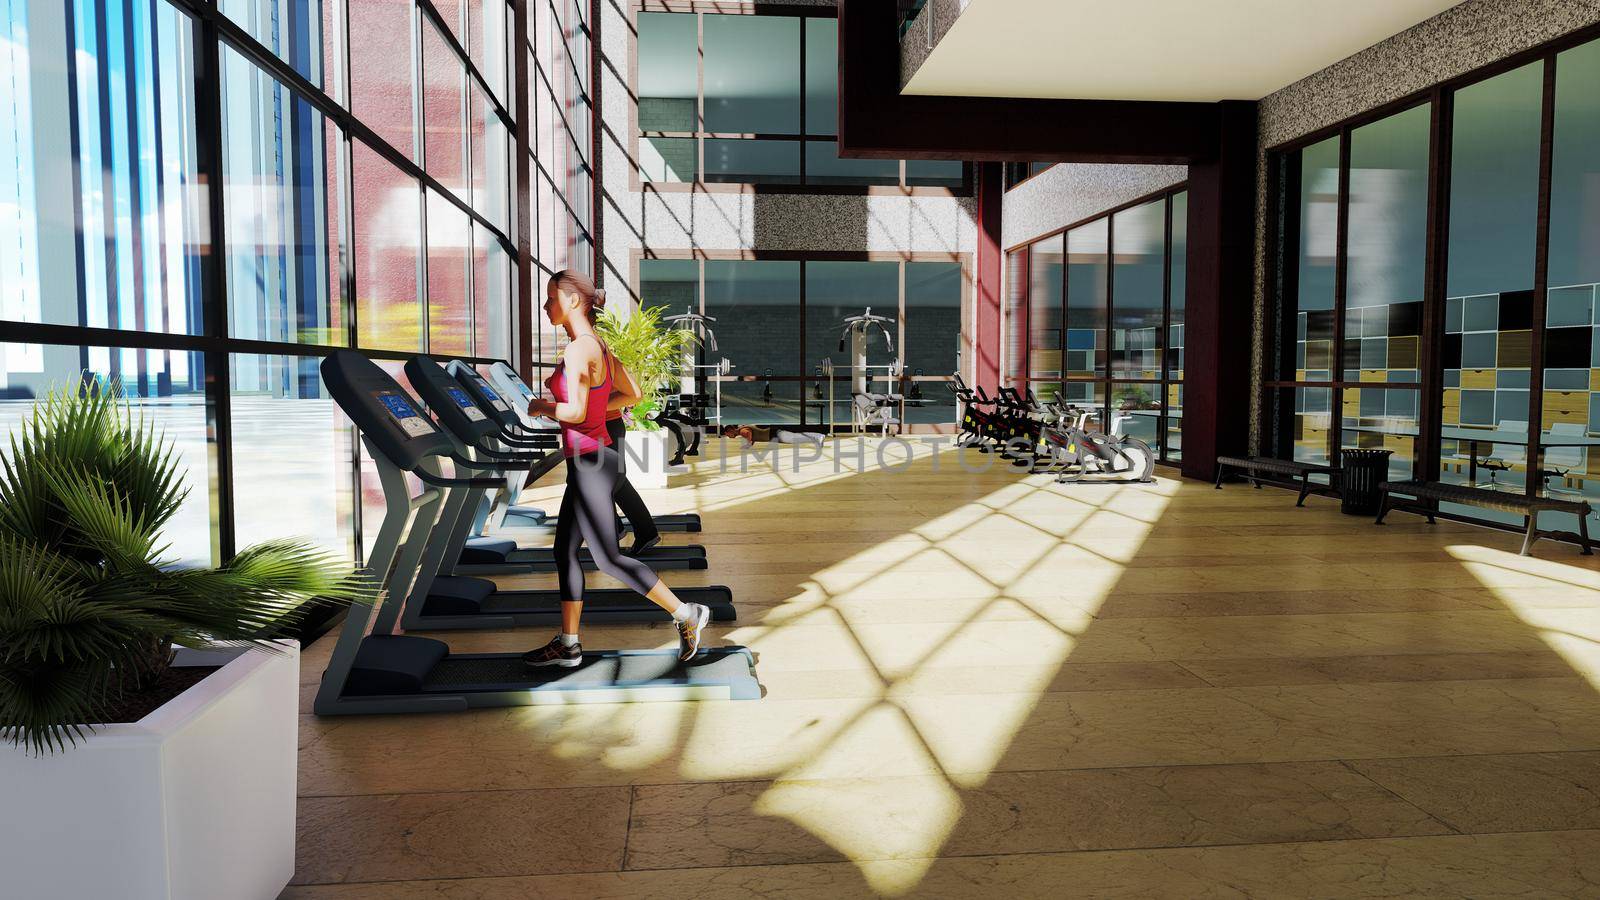 Gym with various exercise machines in it and people walking on treadmill. 3D Rendering by designprojects